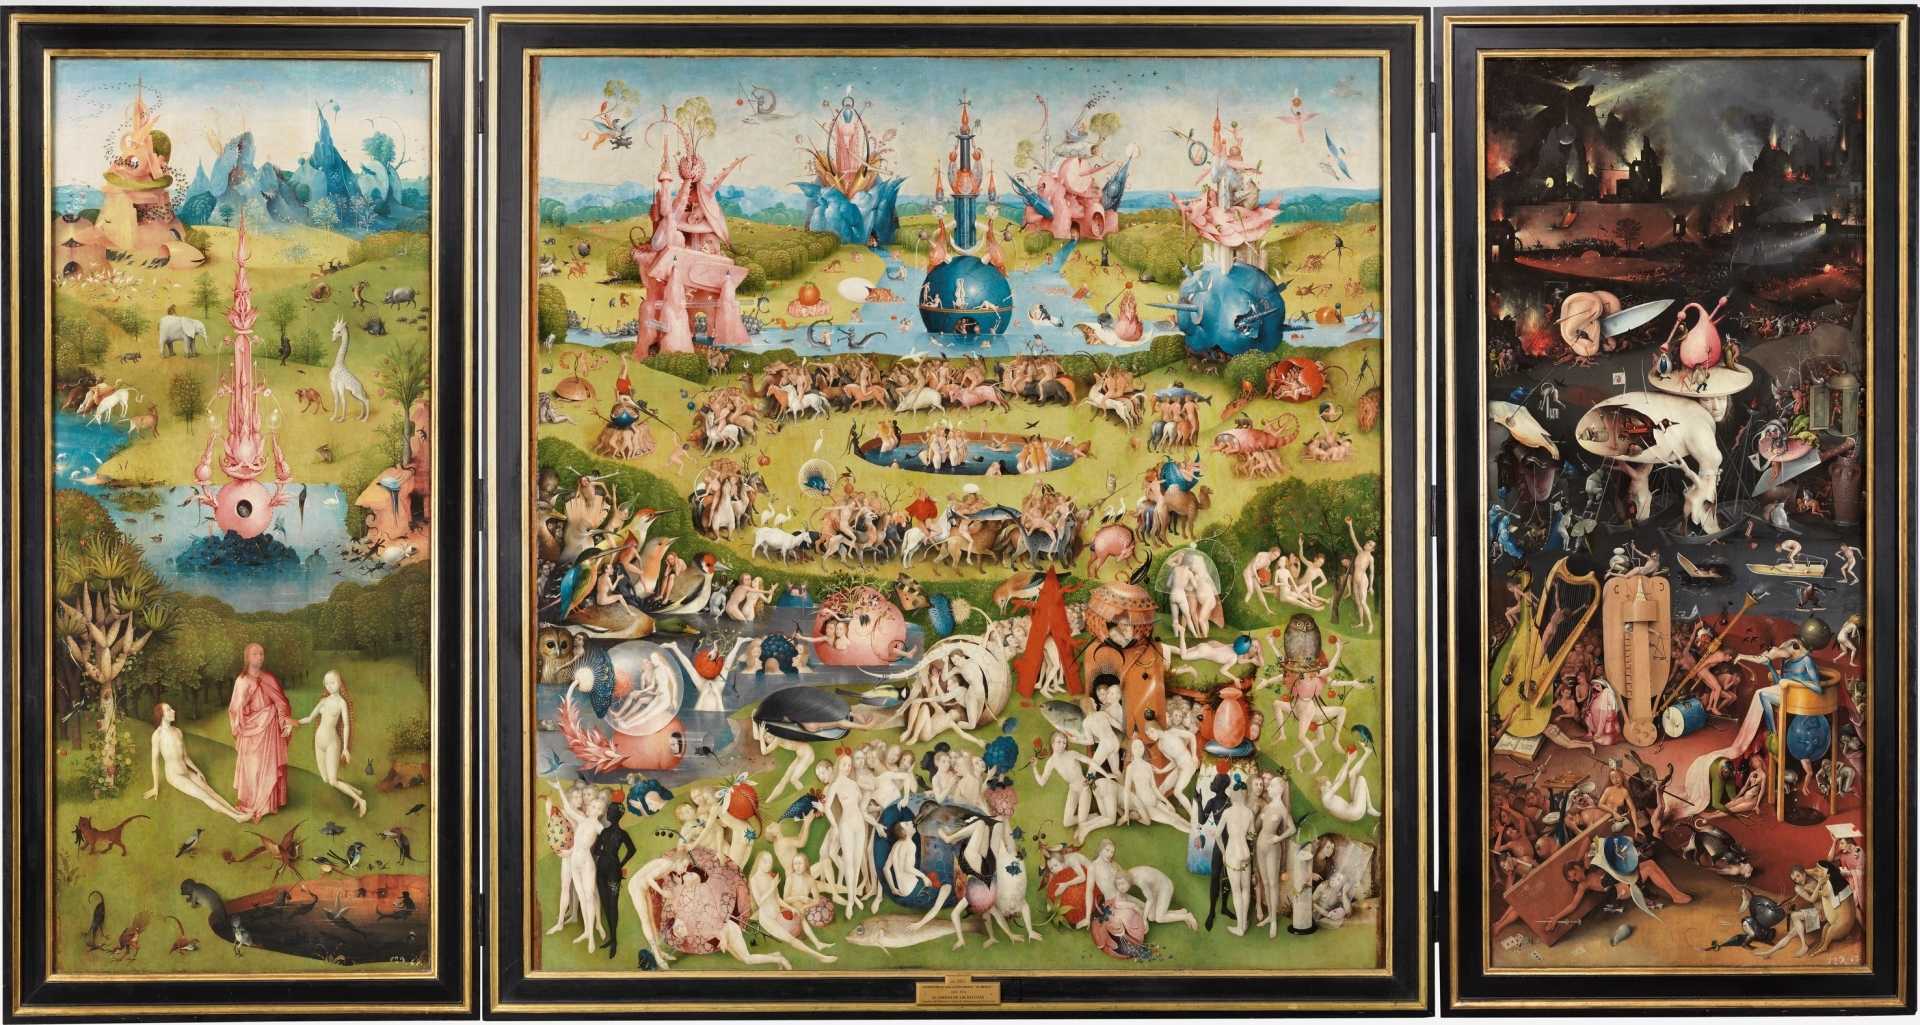 Find out more about Hieronymus Bosch - The Garden of Earthly Delights Triptych